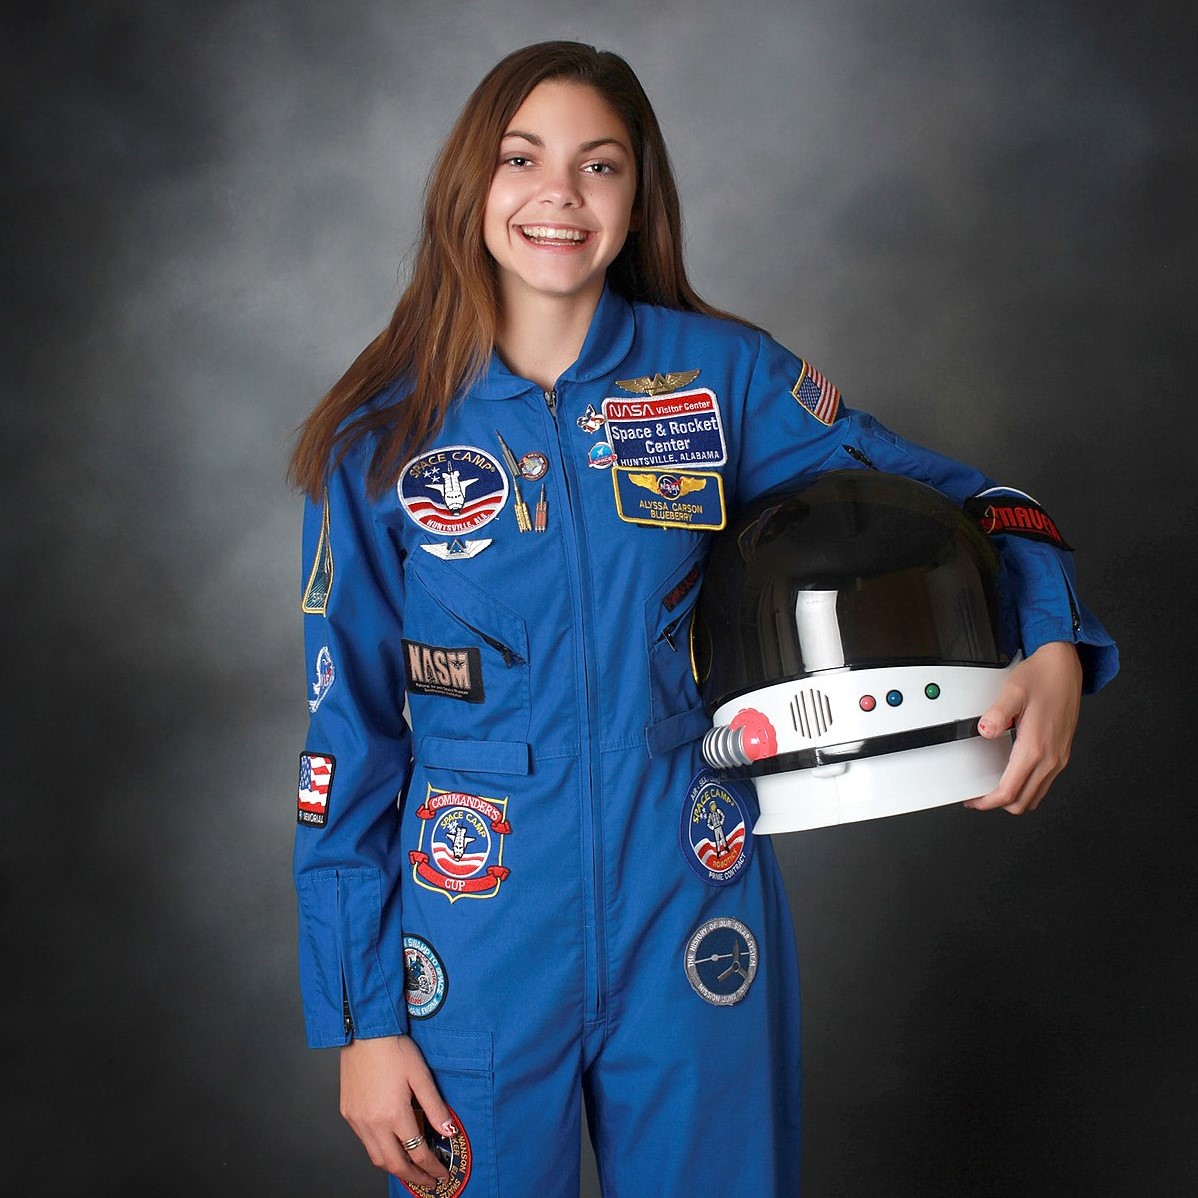 Alyssa Carson, the 19-year-old astronaut who became the youngest person in history to pass all NASA aerospace tests